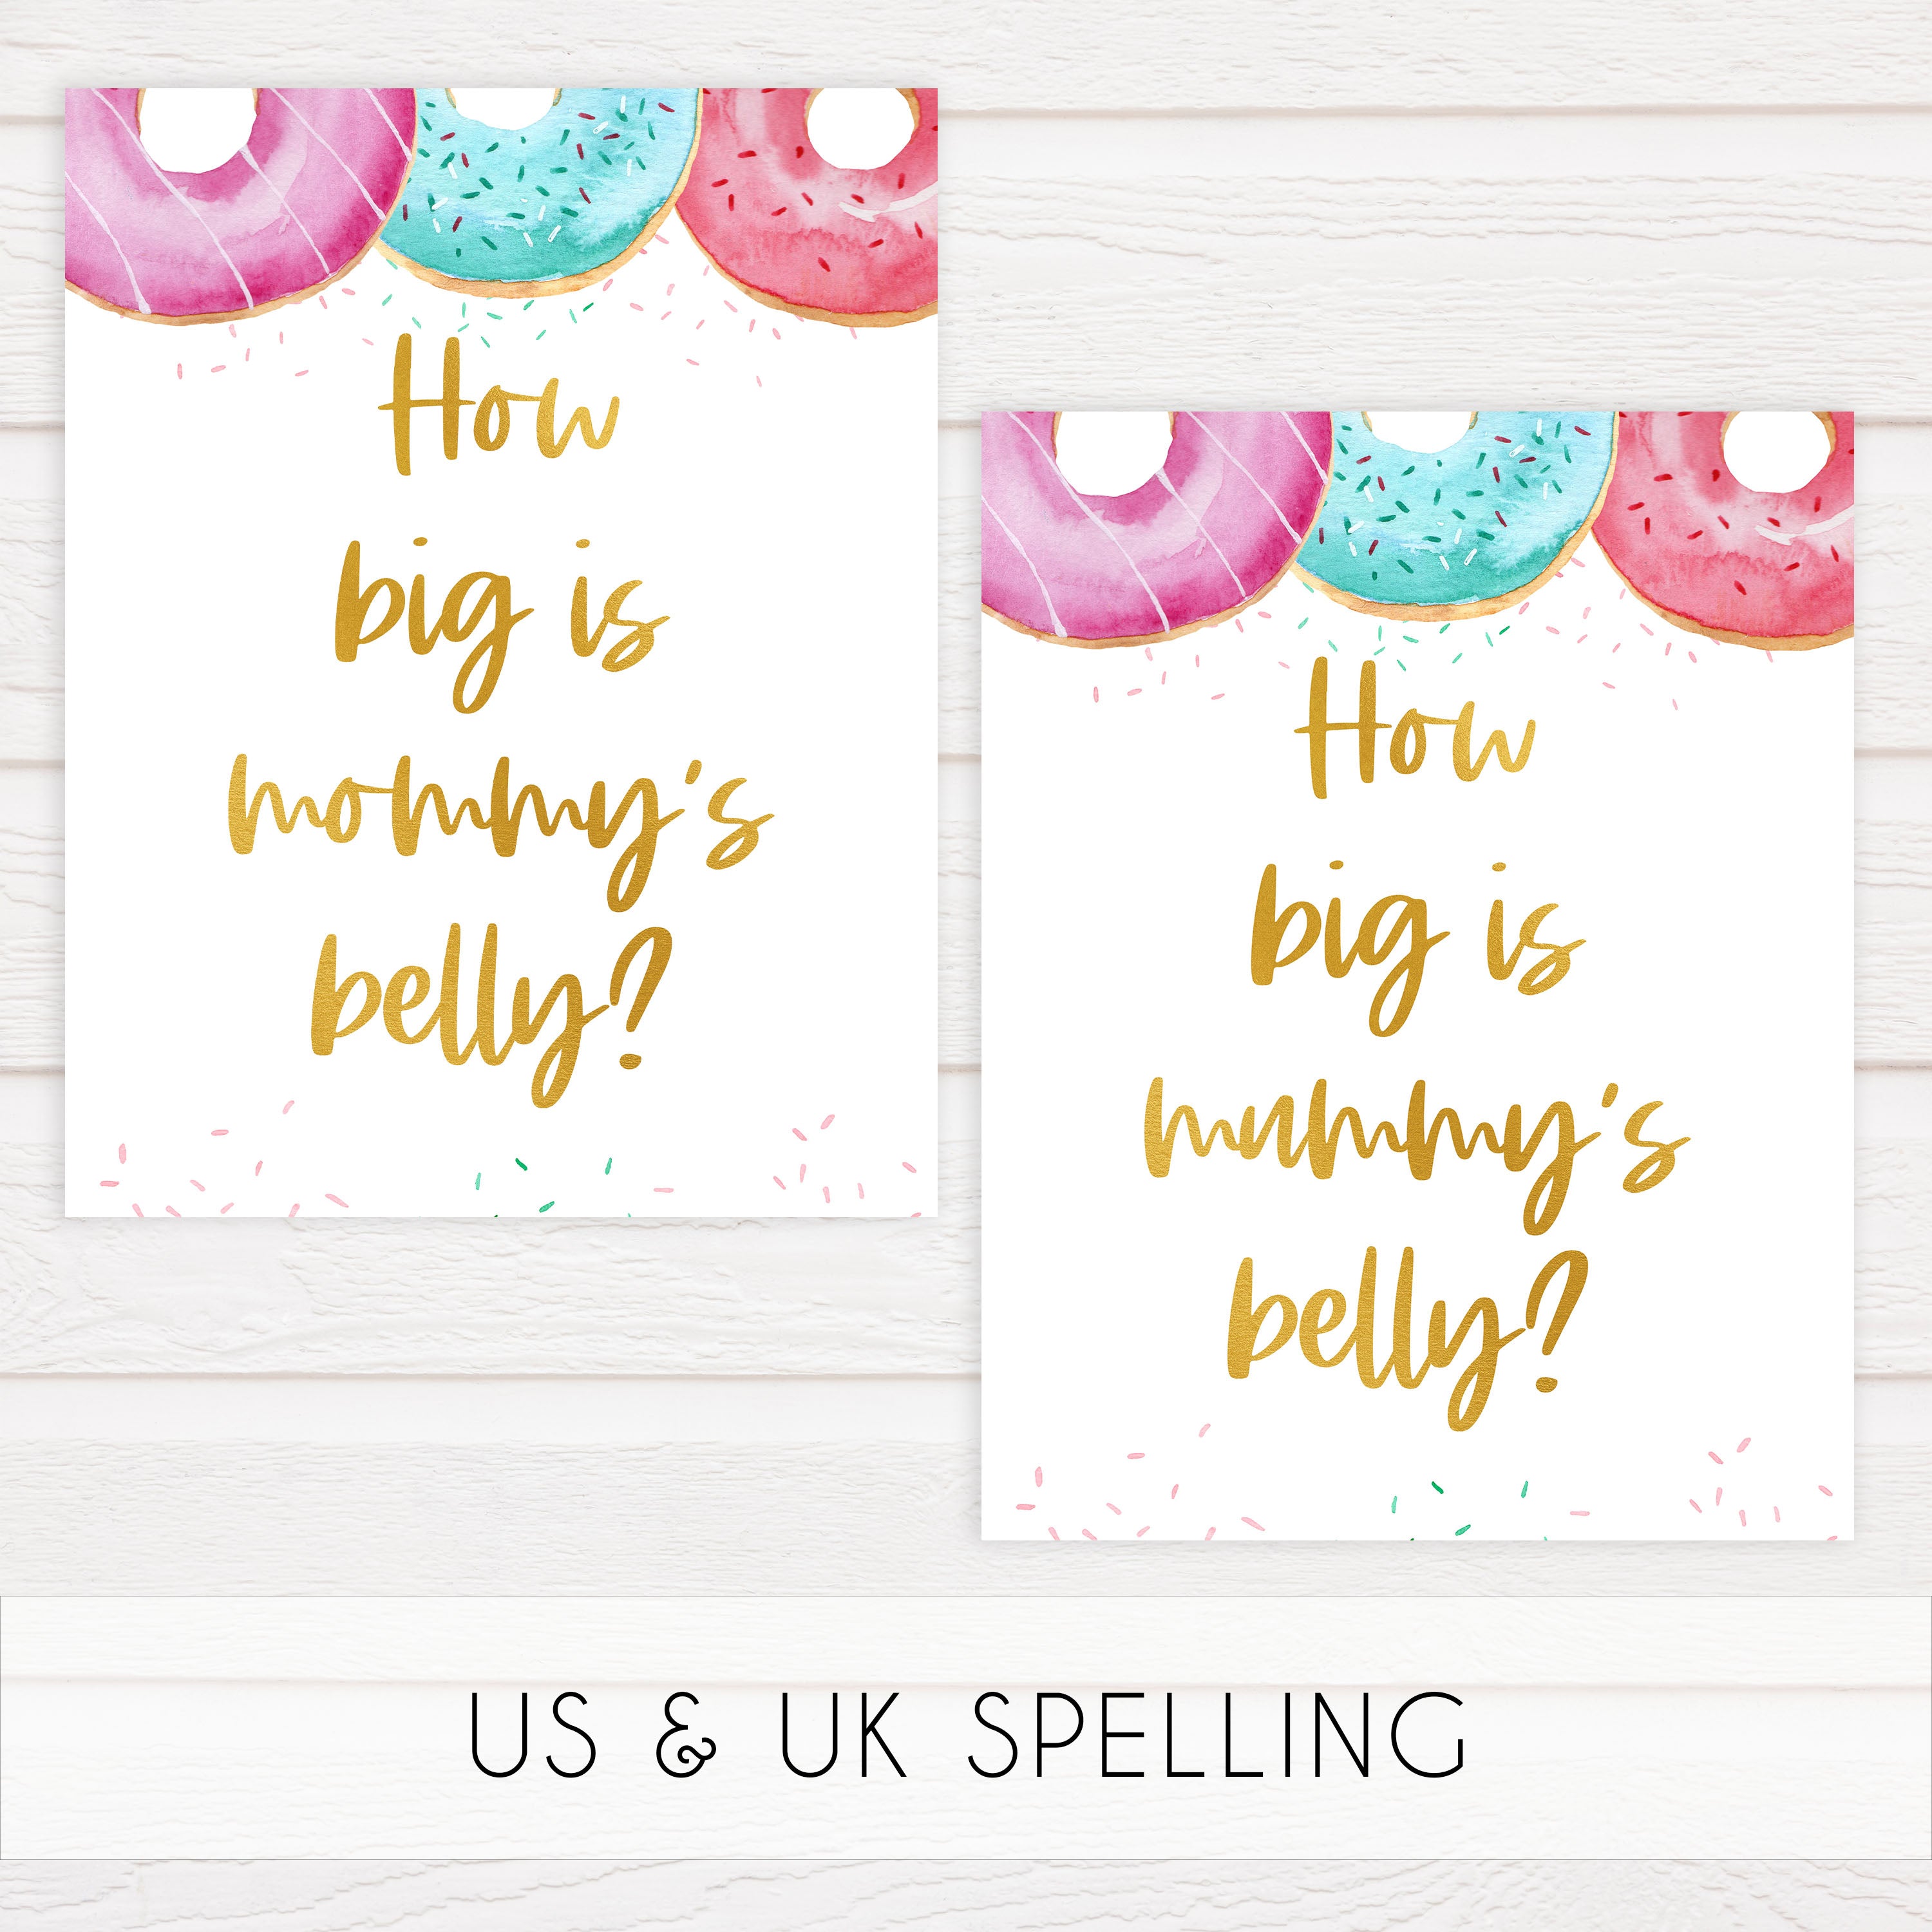 how big is mommys belly game, Printable baby shower games, donut baby games, baby shower games, fun baby shower ideas, top baby shower ideas, donut sprinkles baby shower, baby shower games, fun donut baby shower ideas